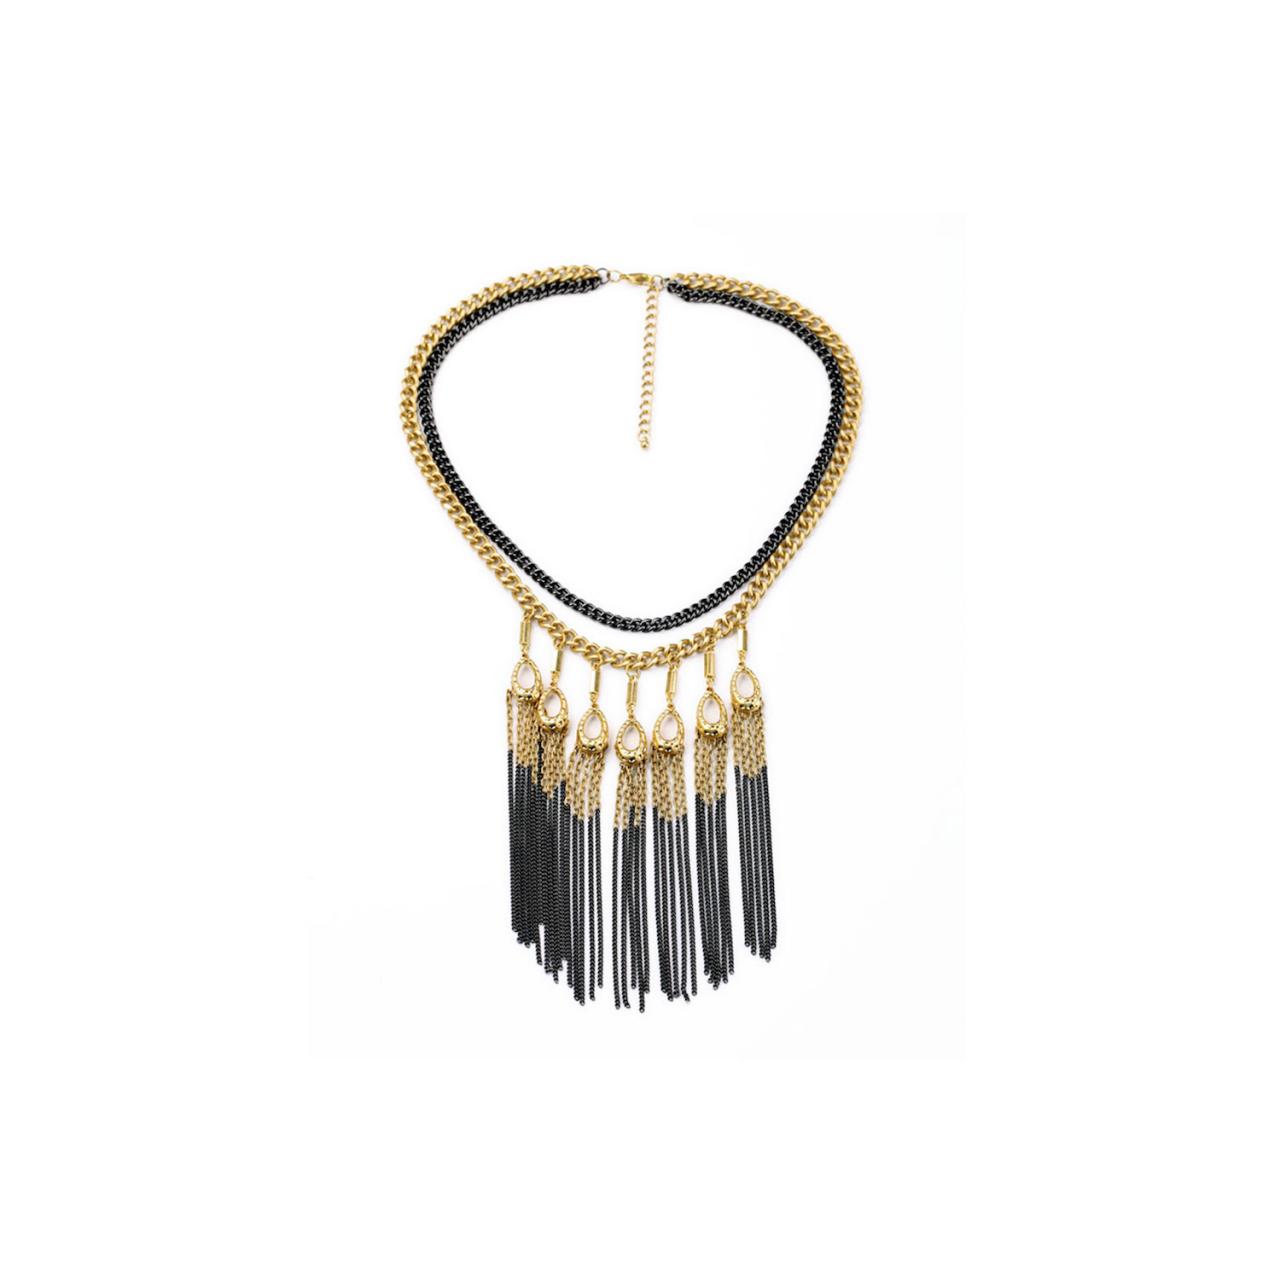 Tribal Necklace / Big Chunky Necklaces / Bohemian Necklace / Unique Necklace / Long Tassel Necklace / Statement Necklace / Matte Black Gold